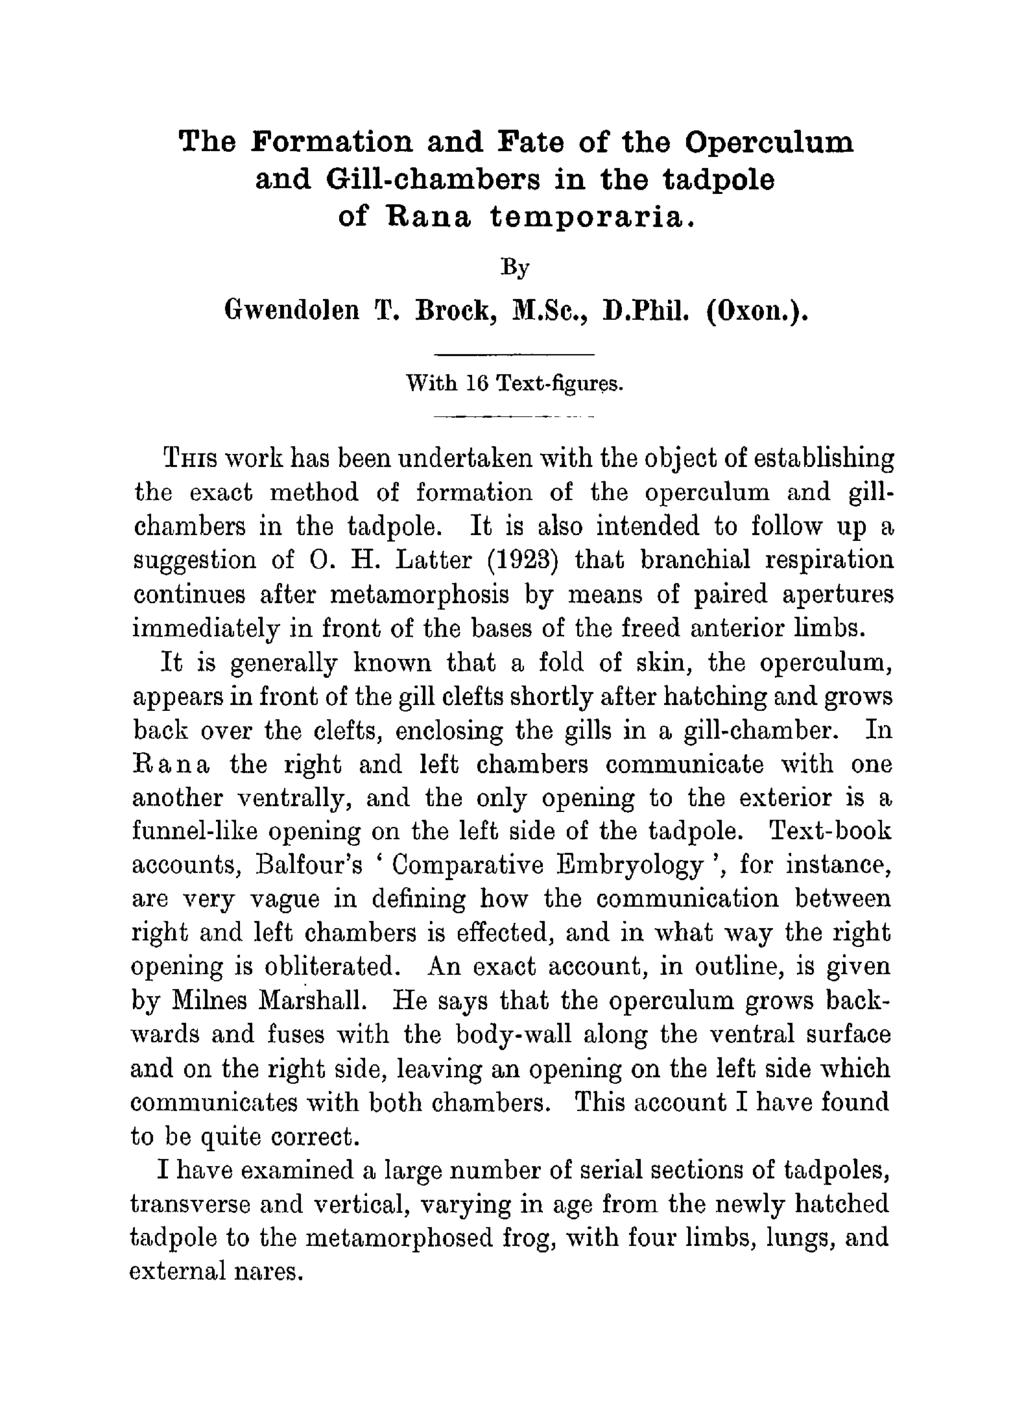 The Formation and Fate of the Operculum and Gill-chambers in the tadpole of Rana temporaria. By Gwendolen T. Brock, M.Sc, D.PM1. (Oxon.). With 16 Text-figures.